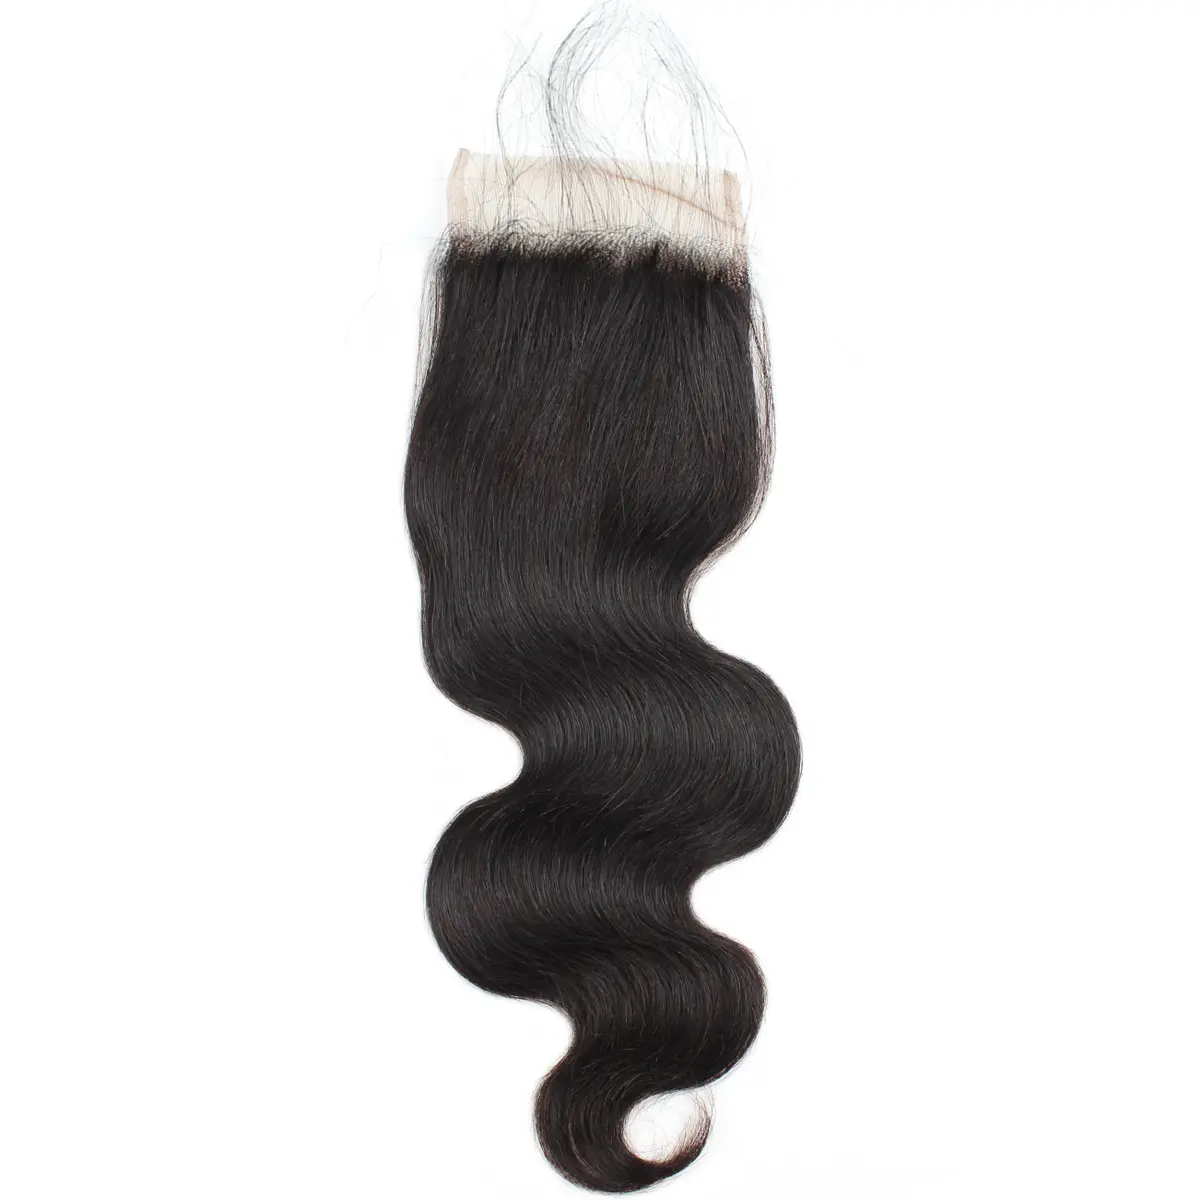 Top Quality silky bodywave lace closure human hair closure weave size 4x4 Lace closure hair